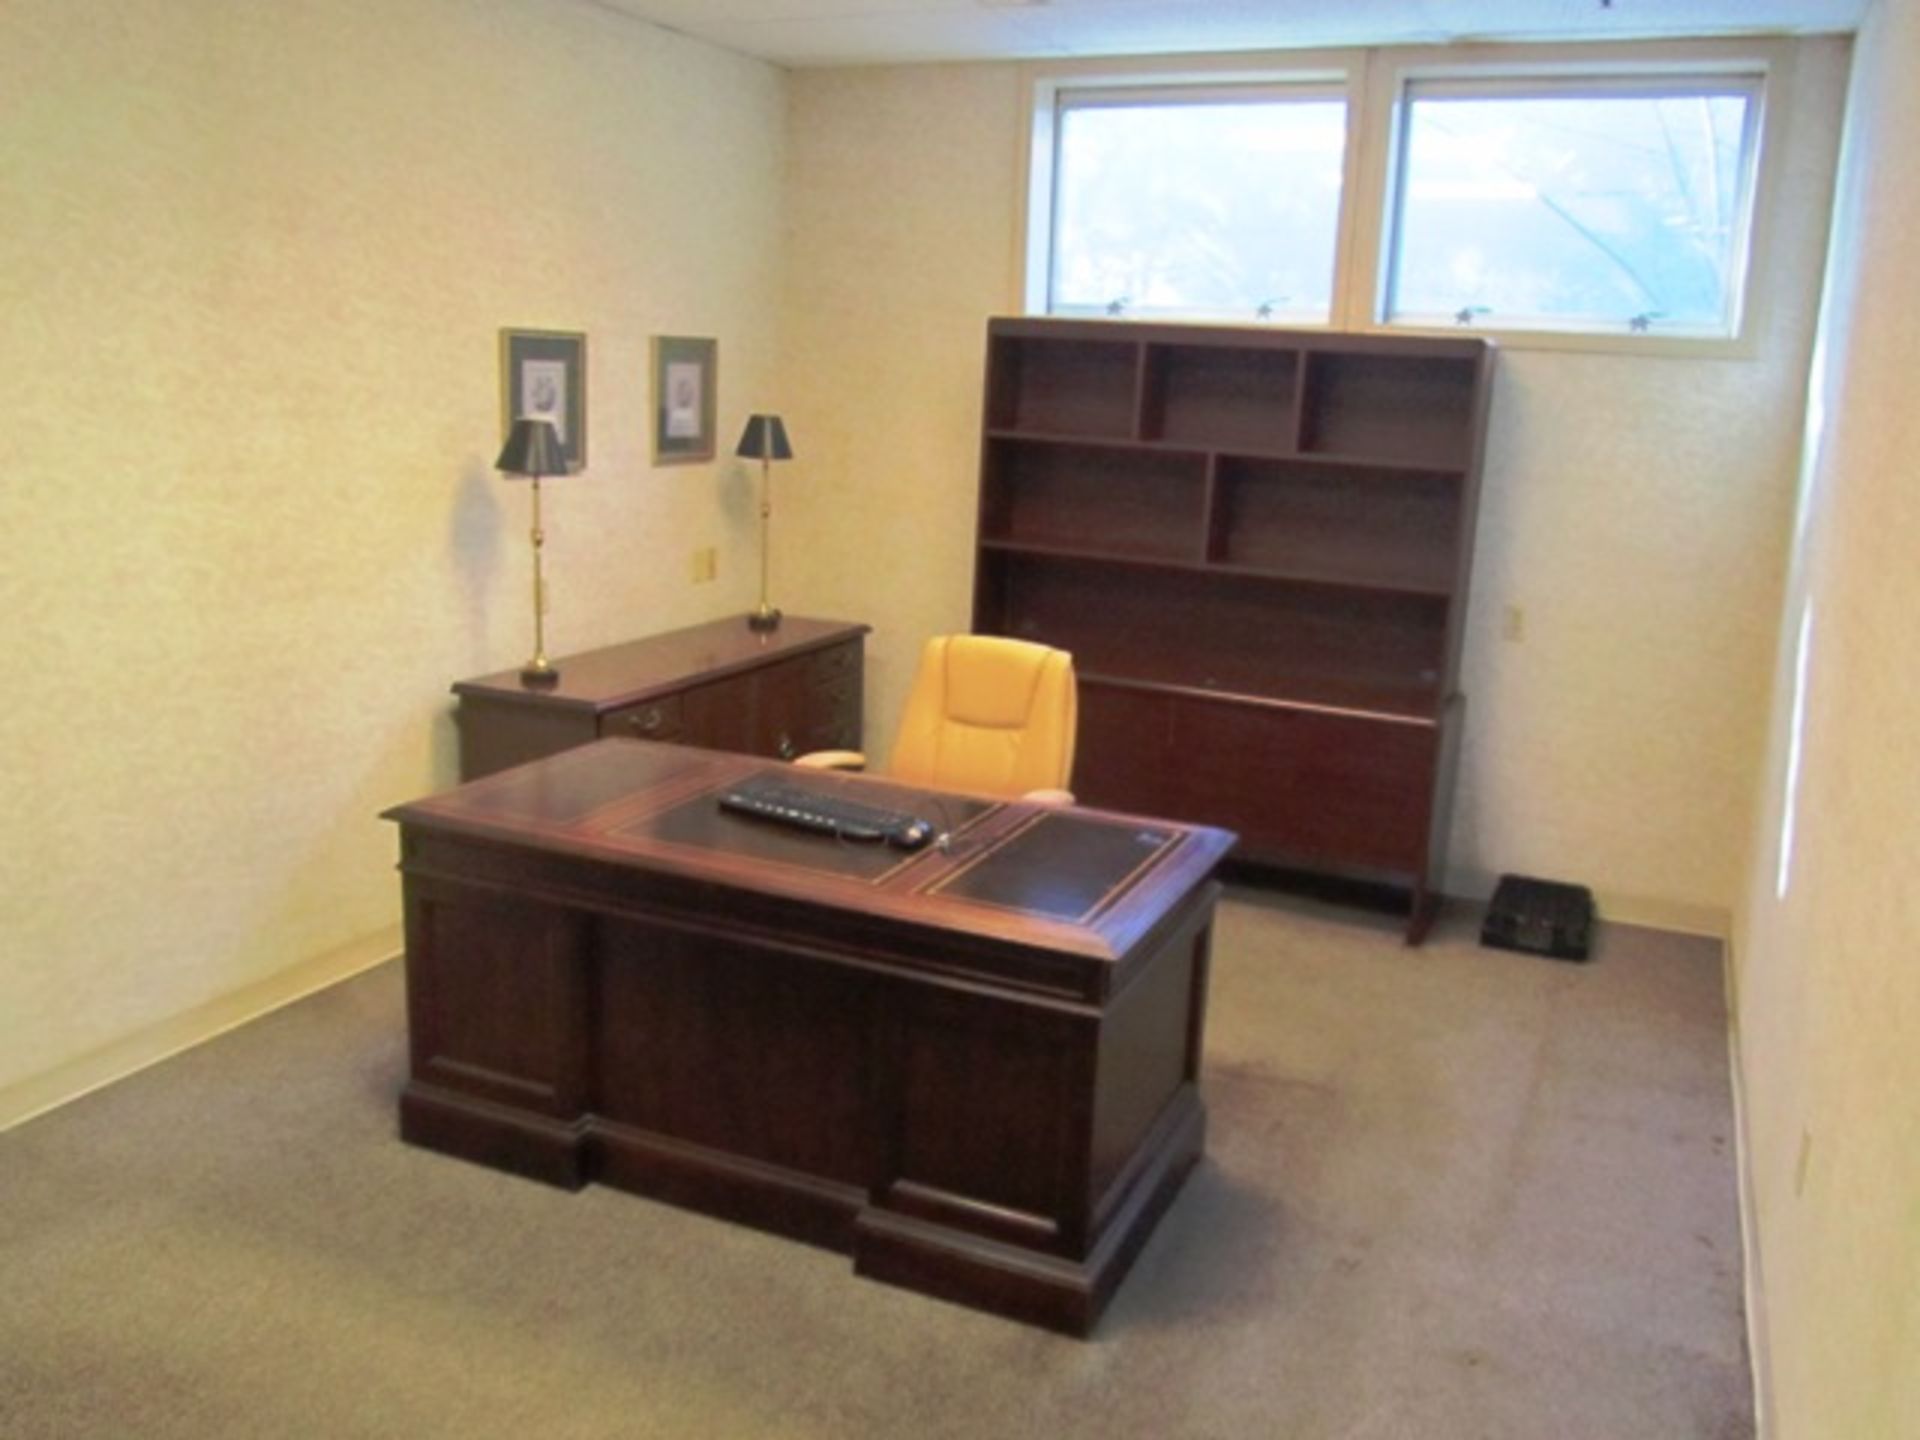 Contents of Office consisting of Desk, Chair, Round Table with (2) Chairs, Credenza, Bookshelf